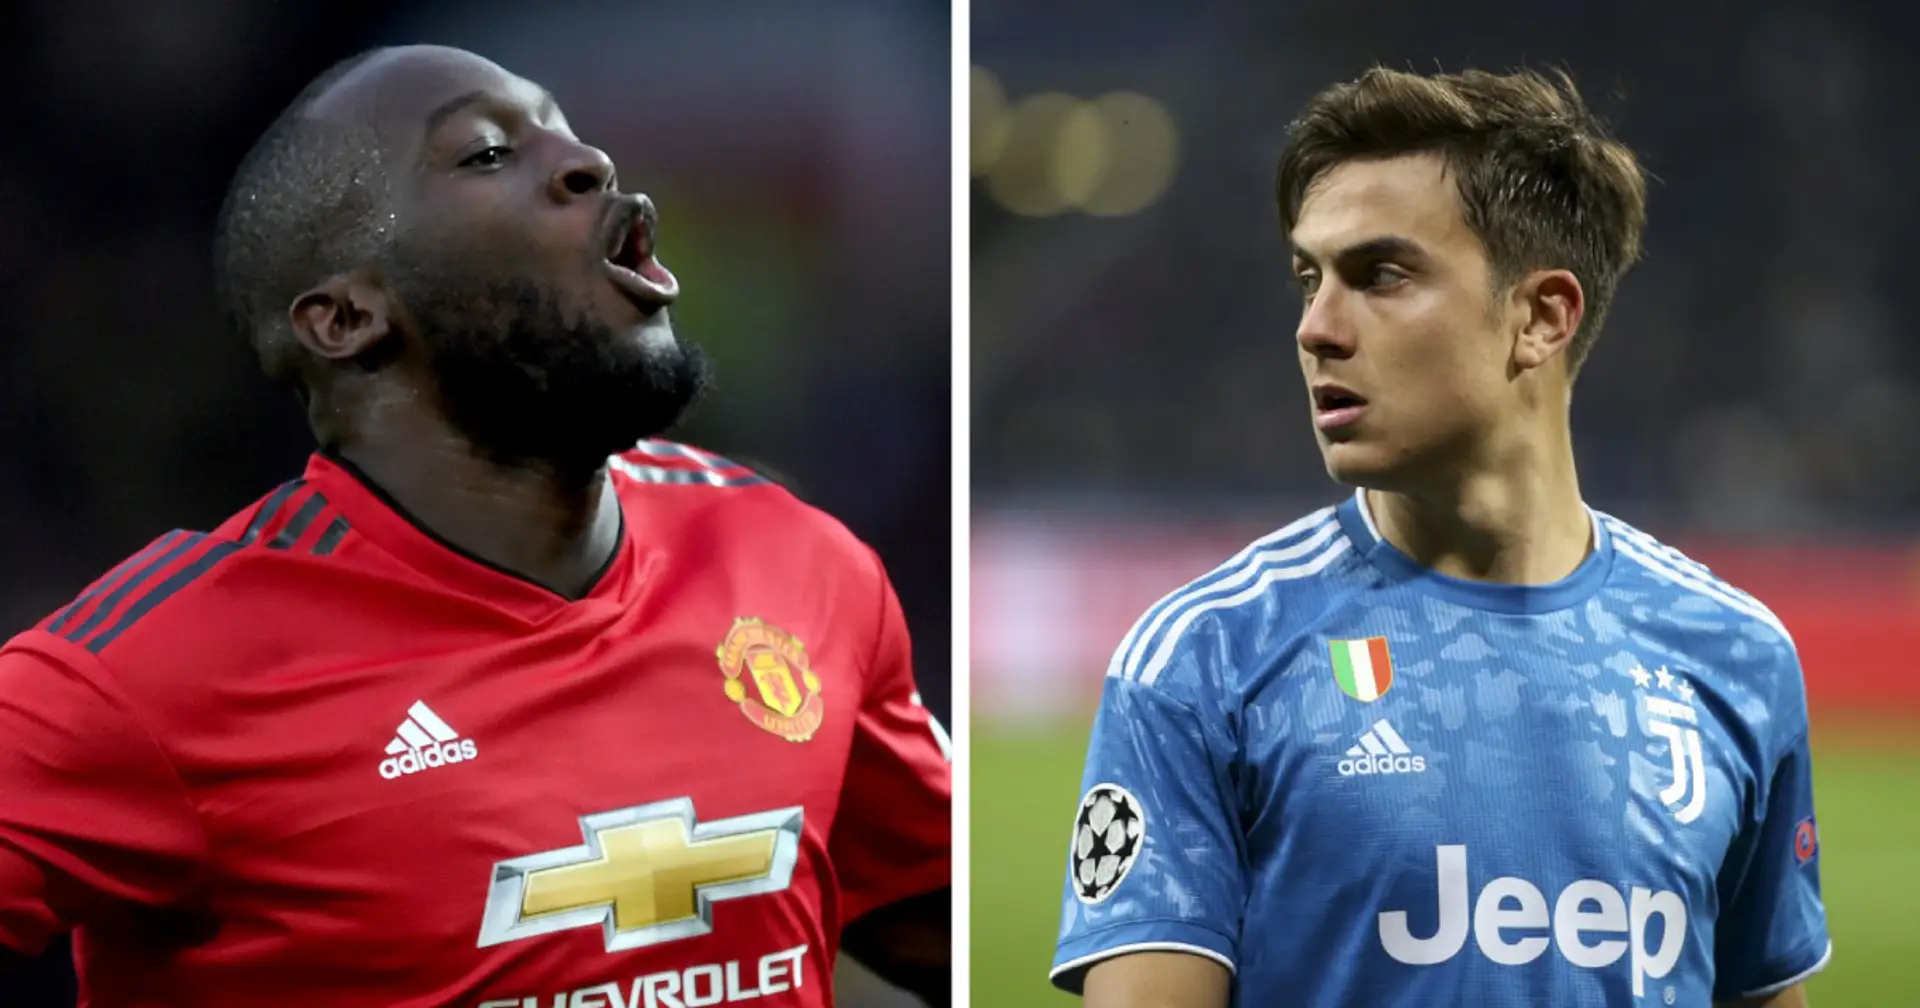 Lukaku to Juventus, Dybala to Man United: Belgian's agent opens up on what could've been last summer